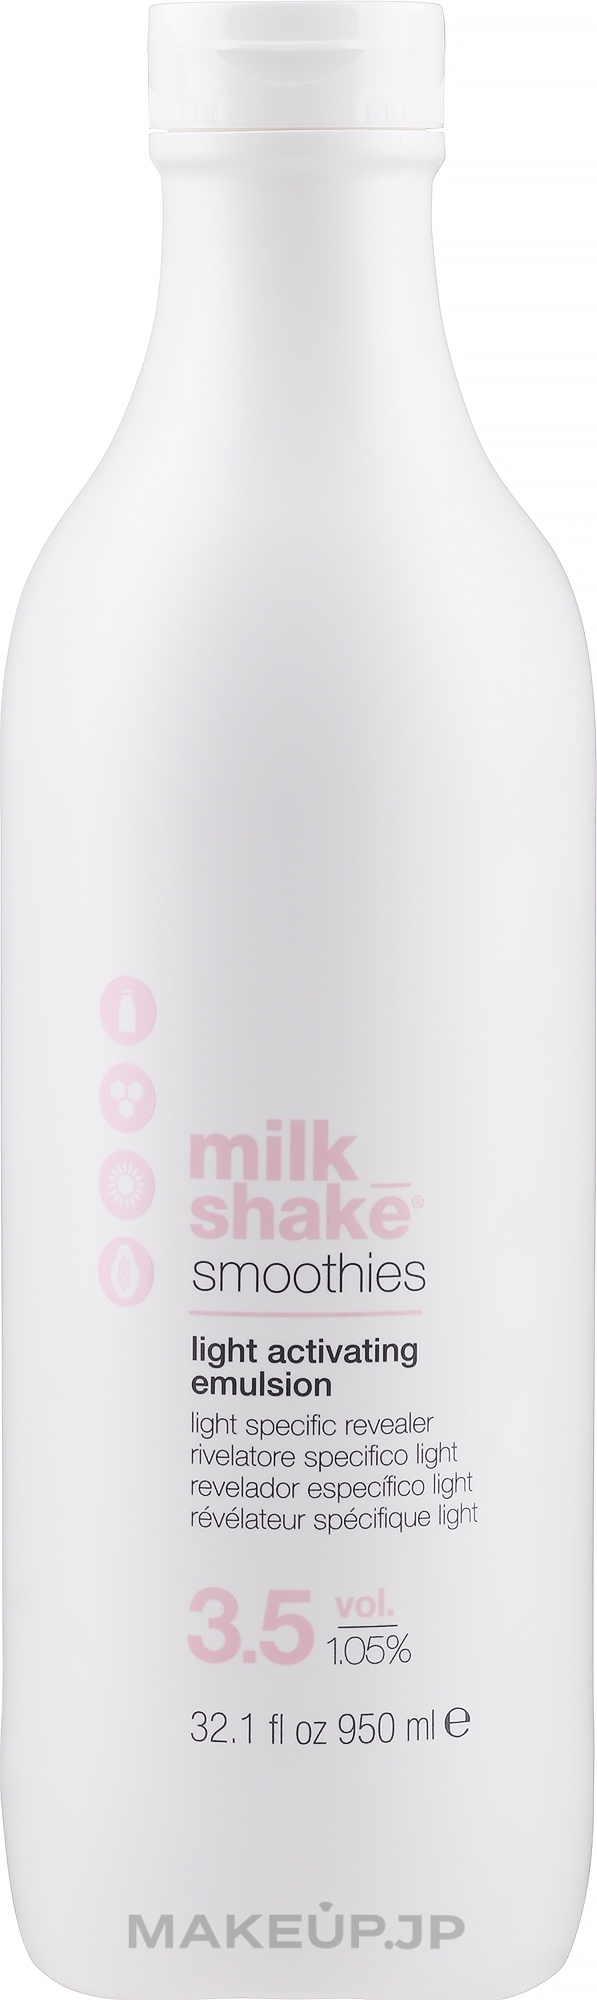 Hair Growth Activating Emulsion - Milk_Shake Smoothies Light Activating Emulsion — photo 1000 ml